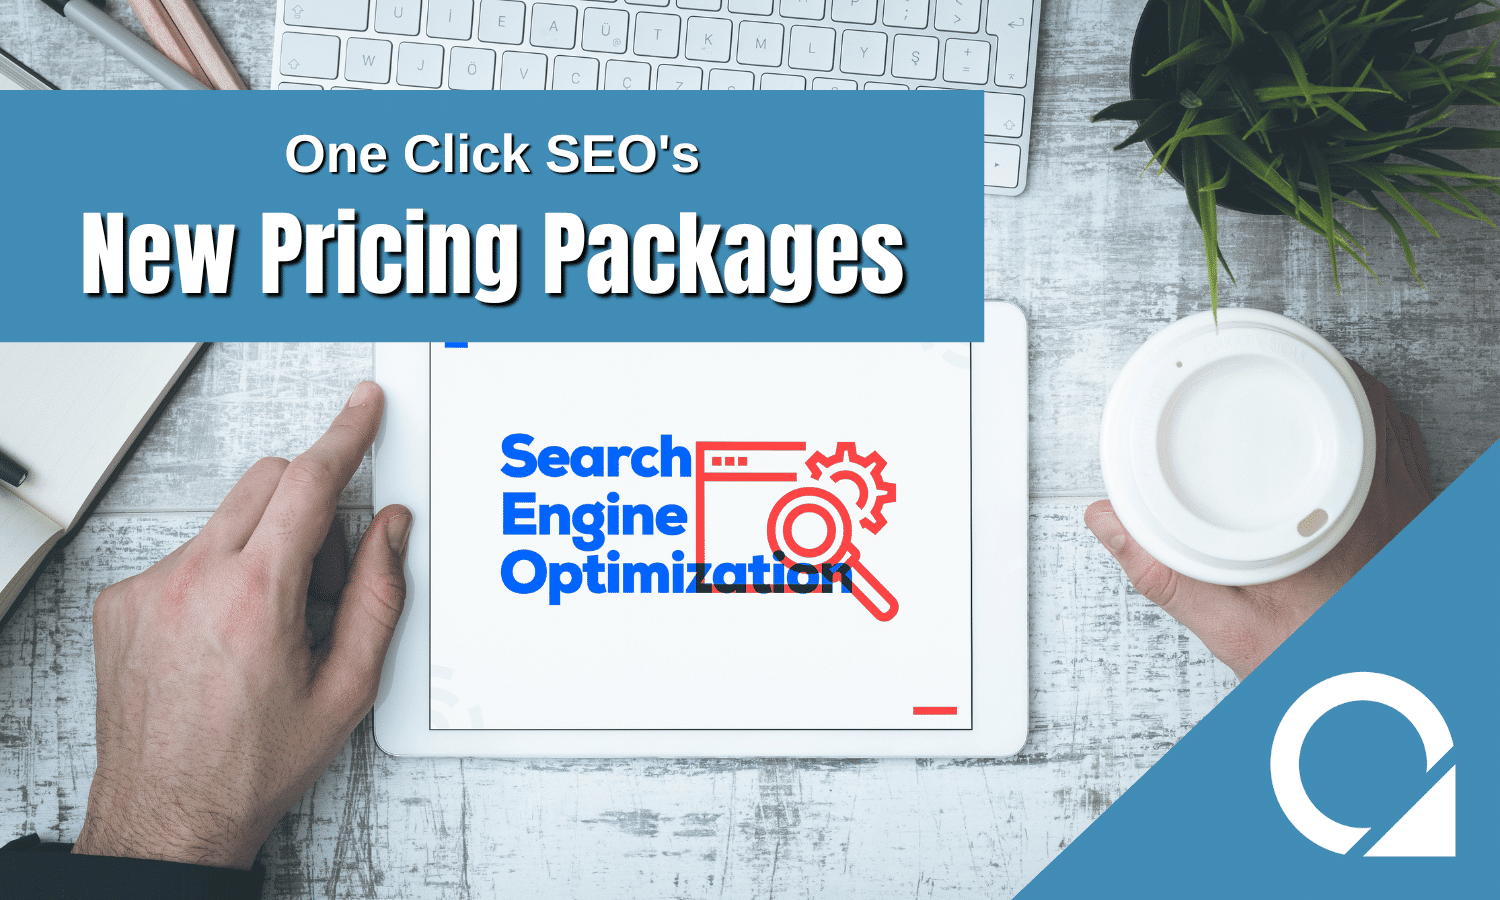 One Click SEOs Pricing Packages